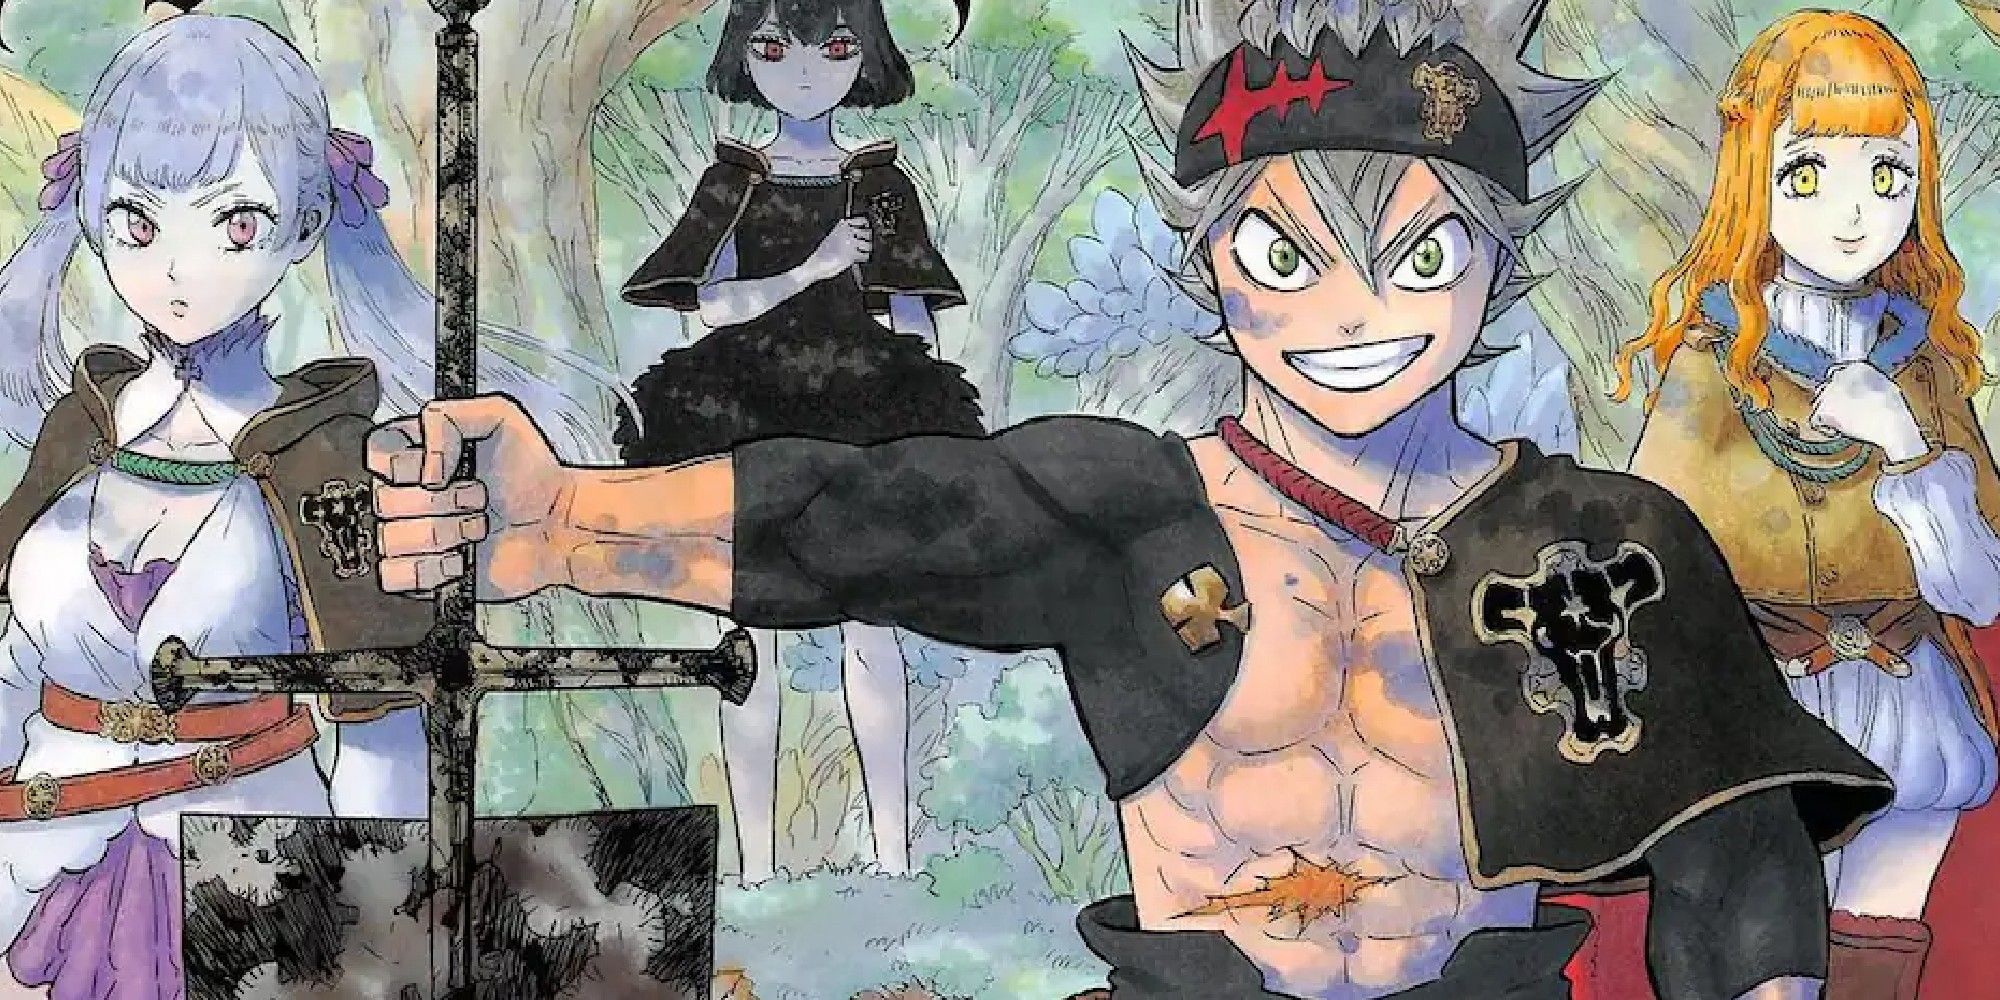 The creator of Black Clover confirmed that the problem was due to an accident